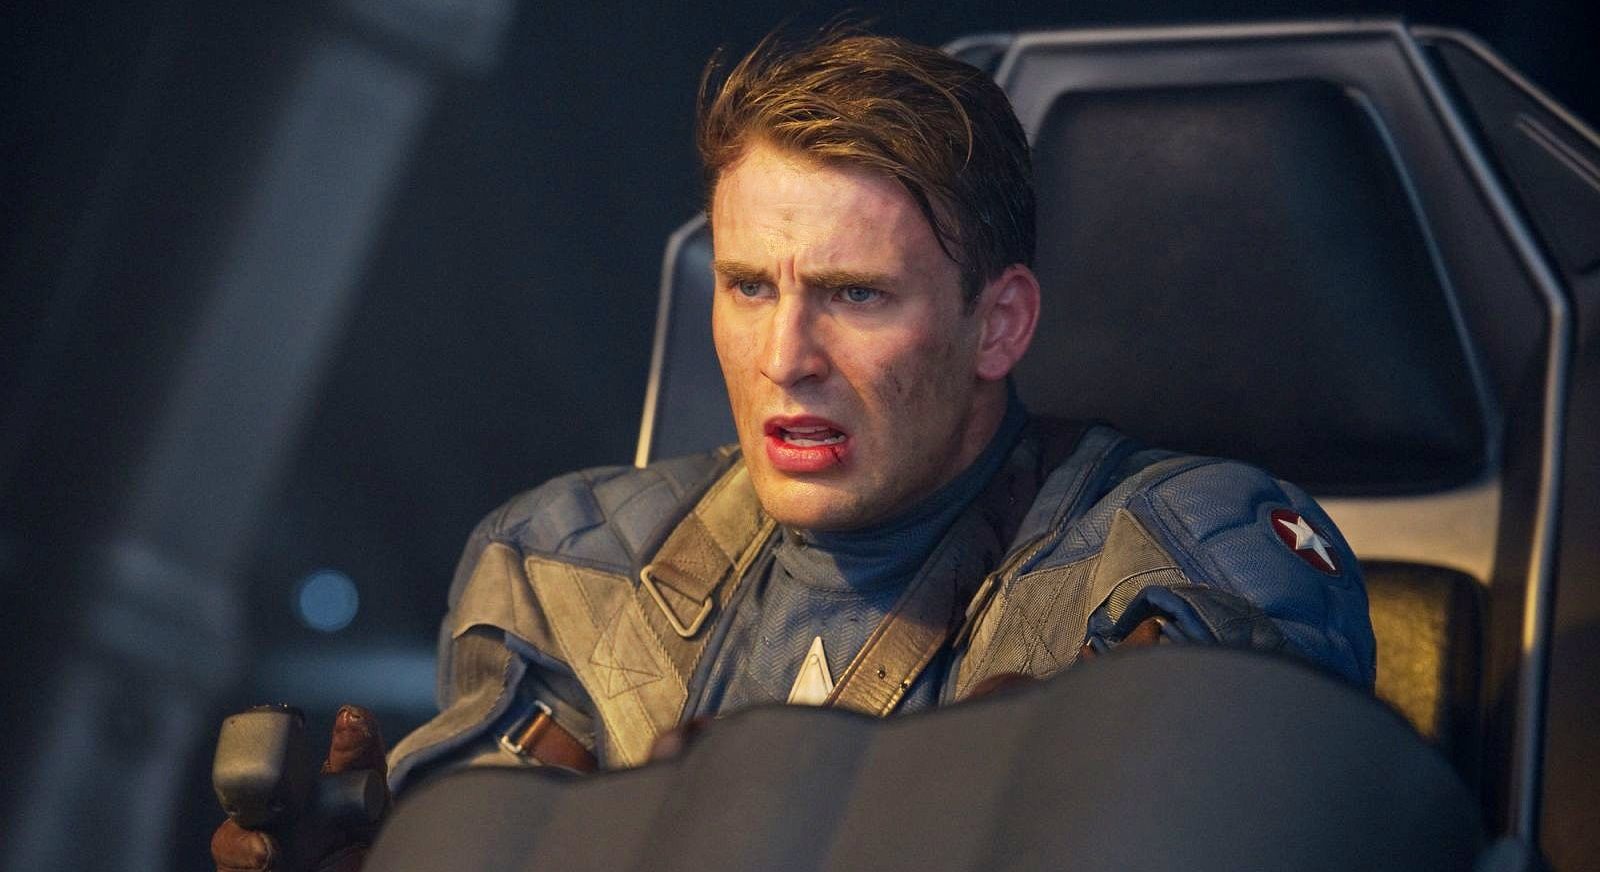 Captain America Piloting in The First Avenger